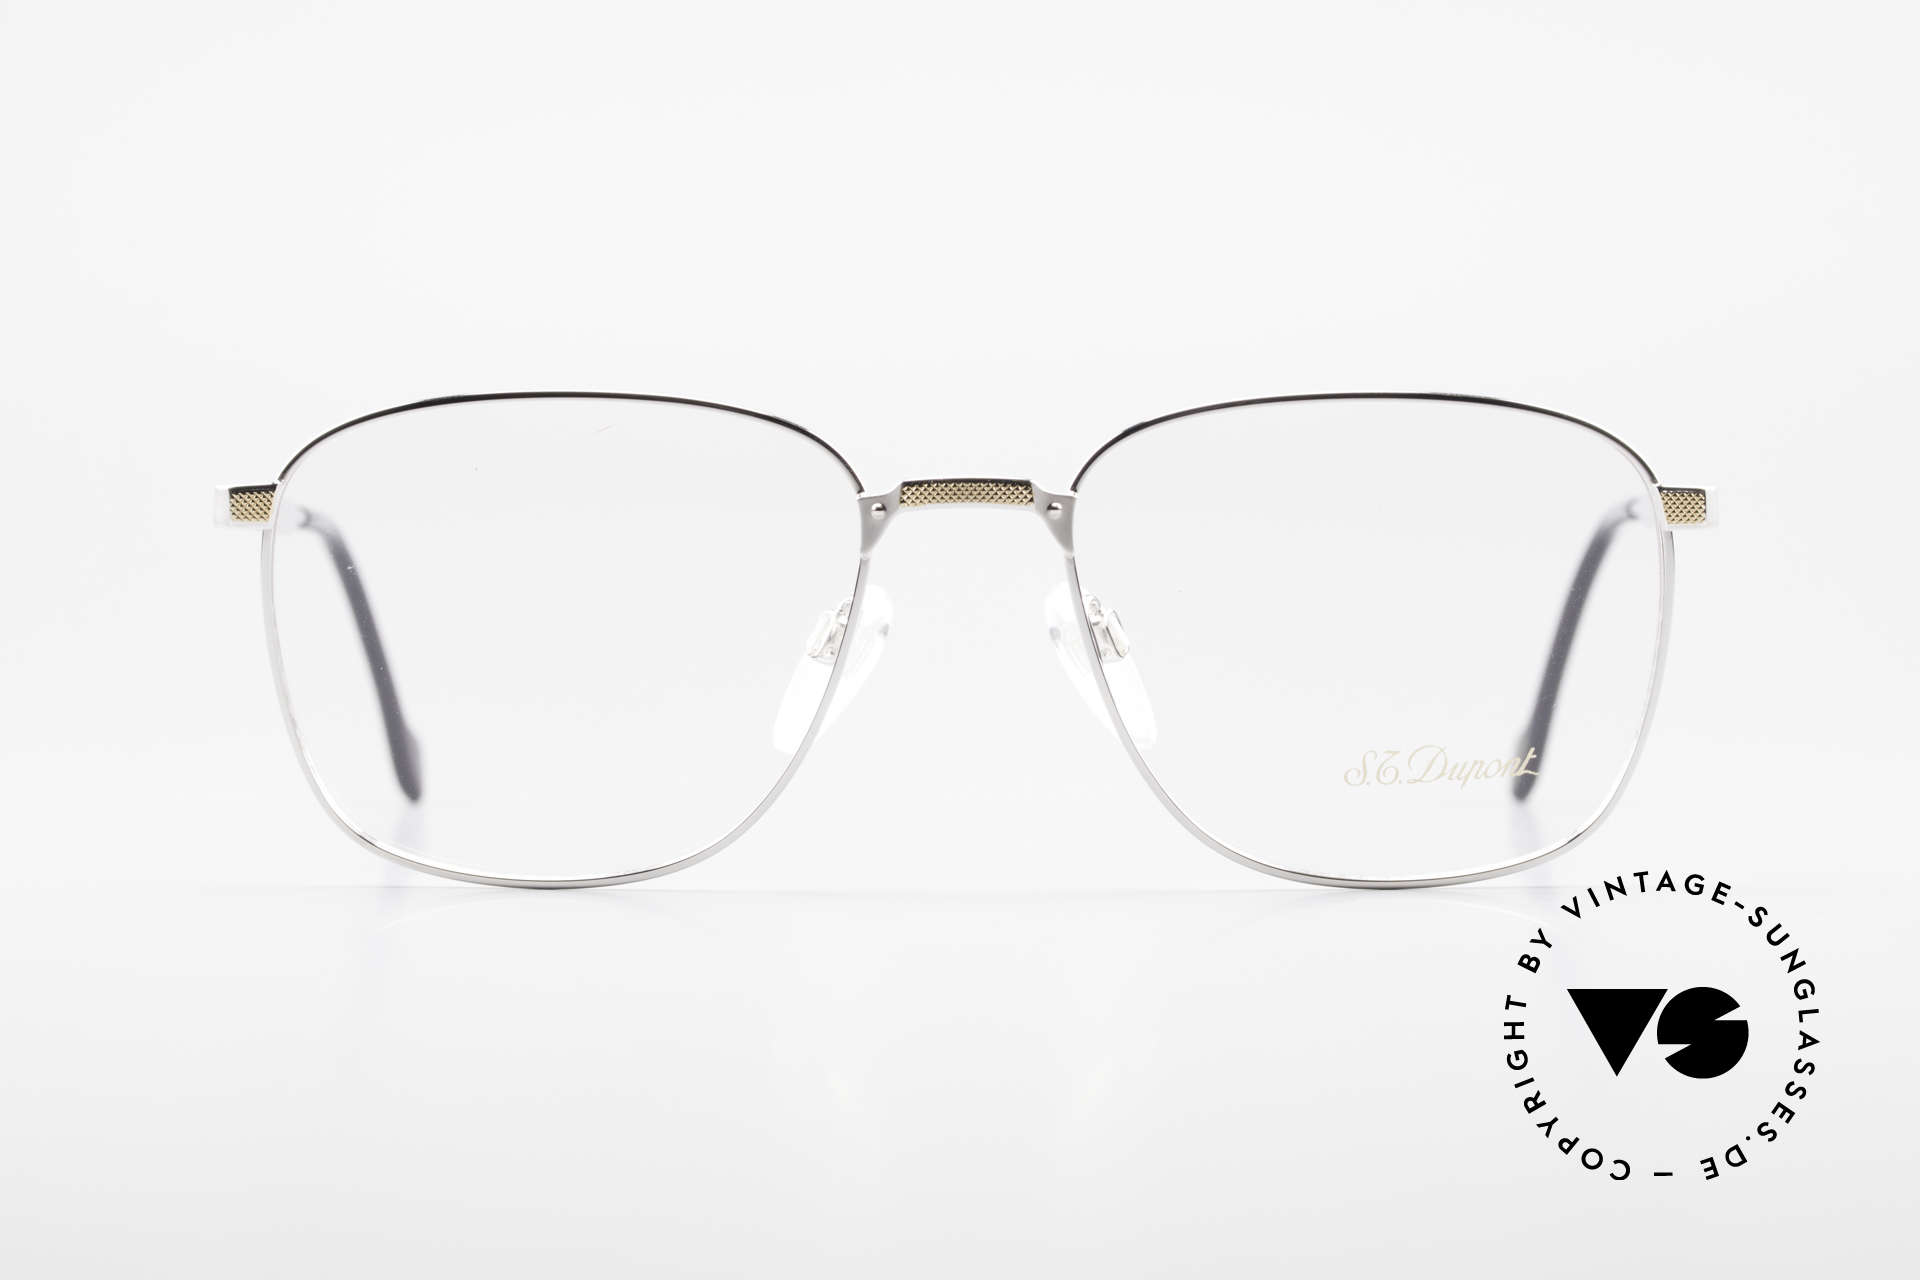 S.T. Dupont D048 Classic Luxury Eyeglasses 23kt, very exclusive S.T. DUPONT luxury frame  in size 56°18, Made for Men